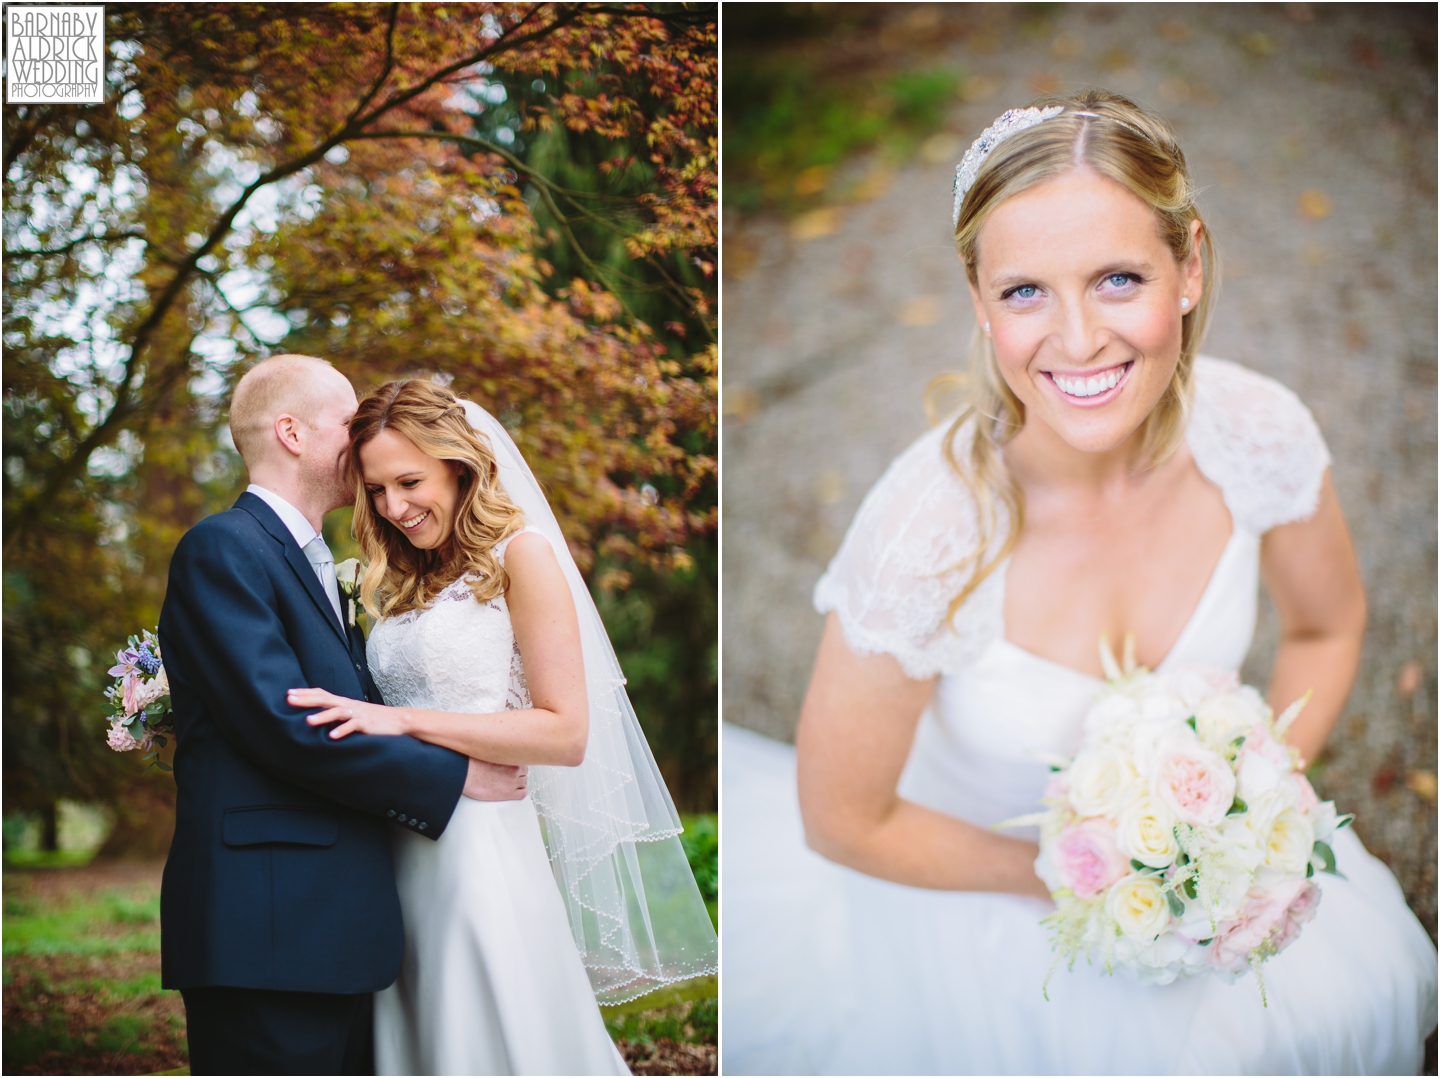 Relaxed wedding couple portraits at Middleton Lodge